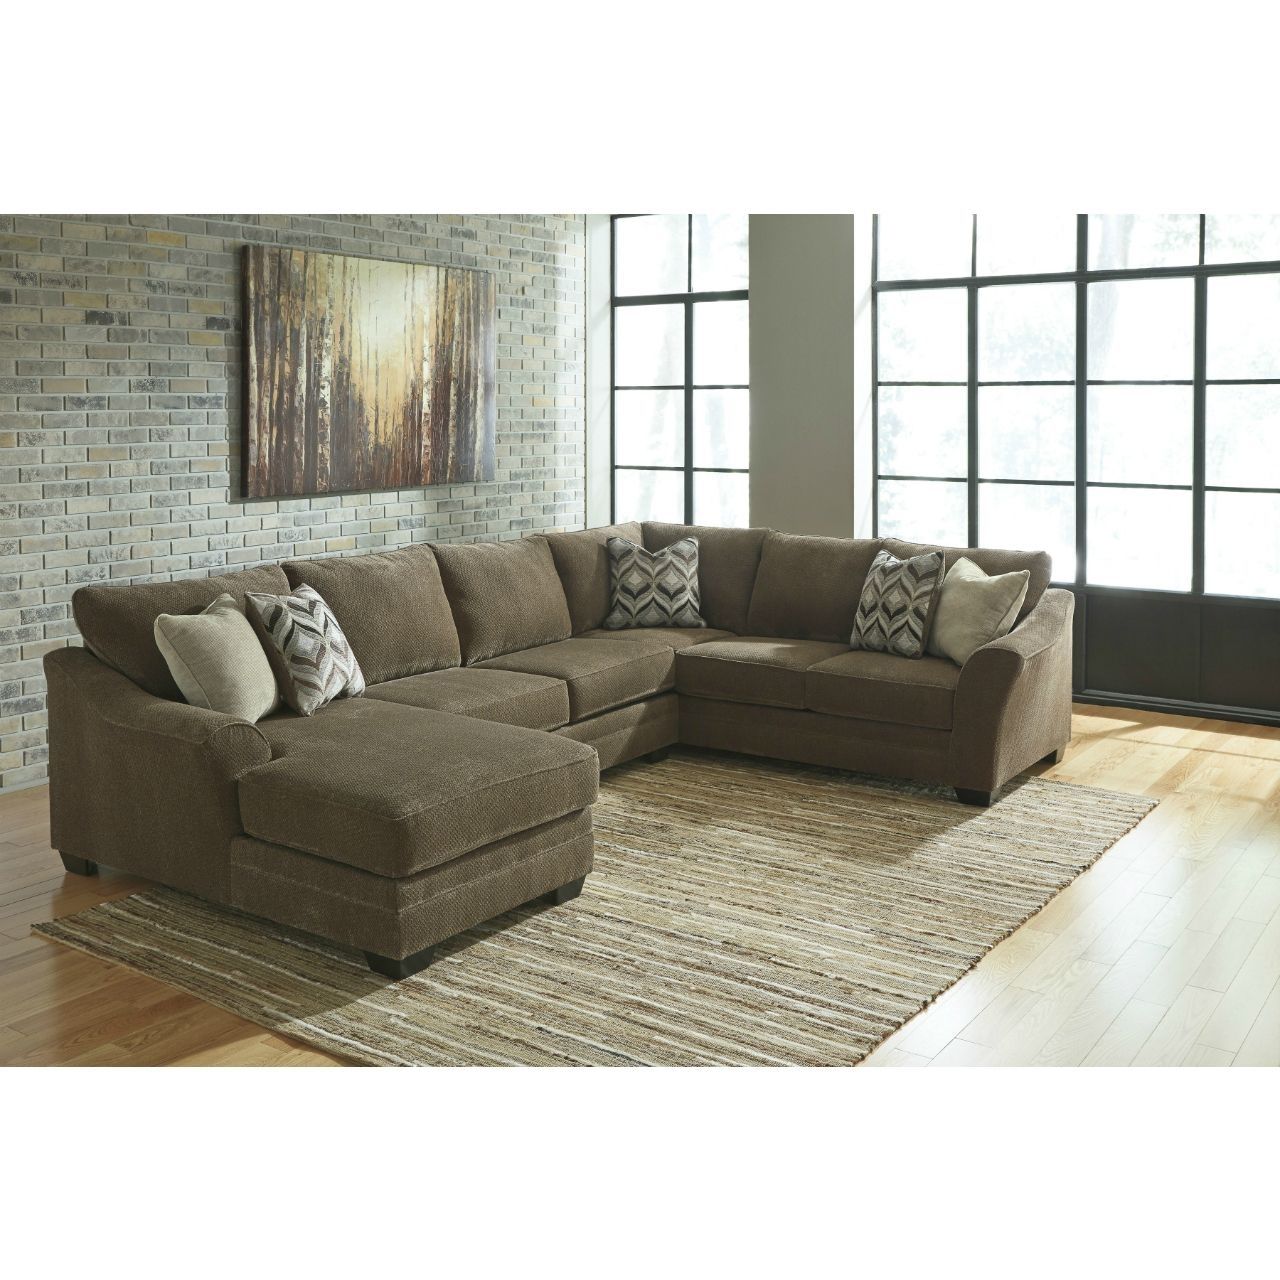 Douglas 3 Piece Sectional | For The Home | Pinterest | Mattress With Regard To Benton 4 Piece Sectionals (View 19 of 30)